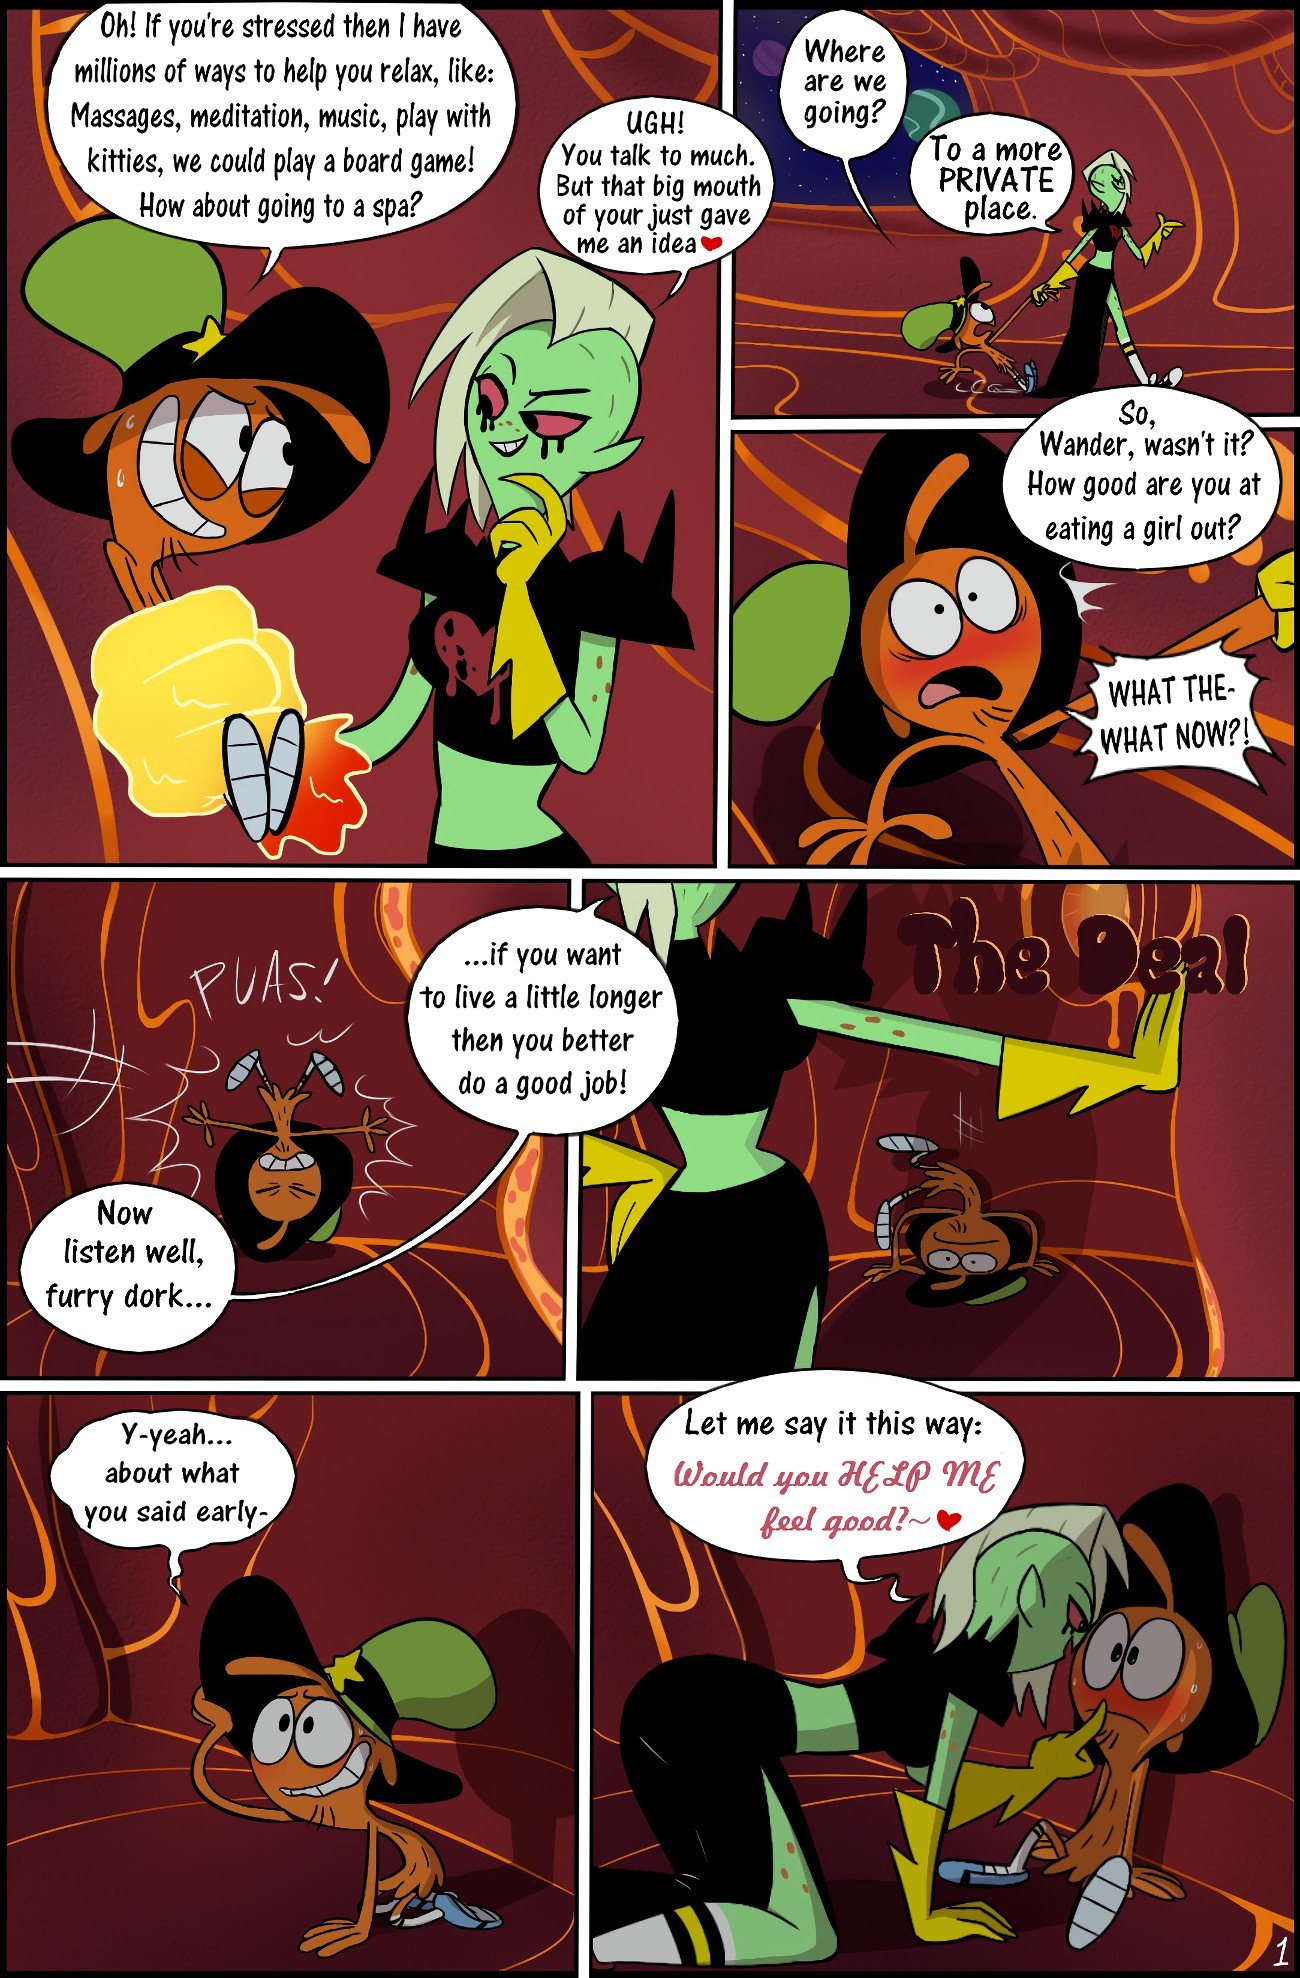 The Deal Wander Over Yonder 2